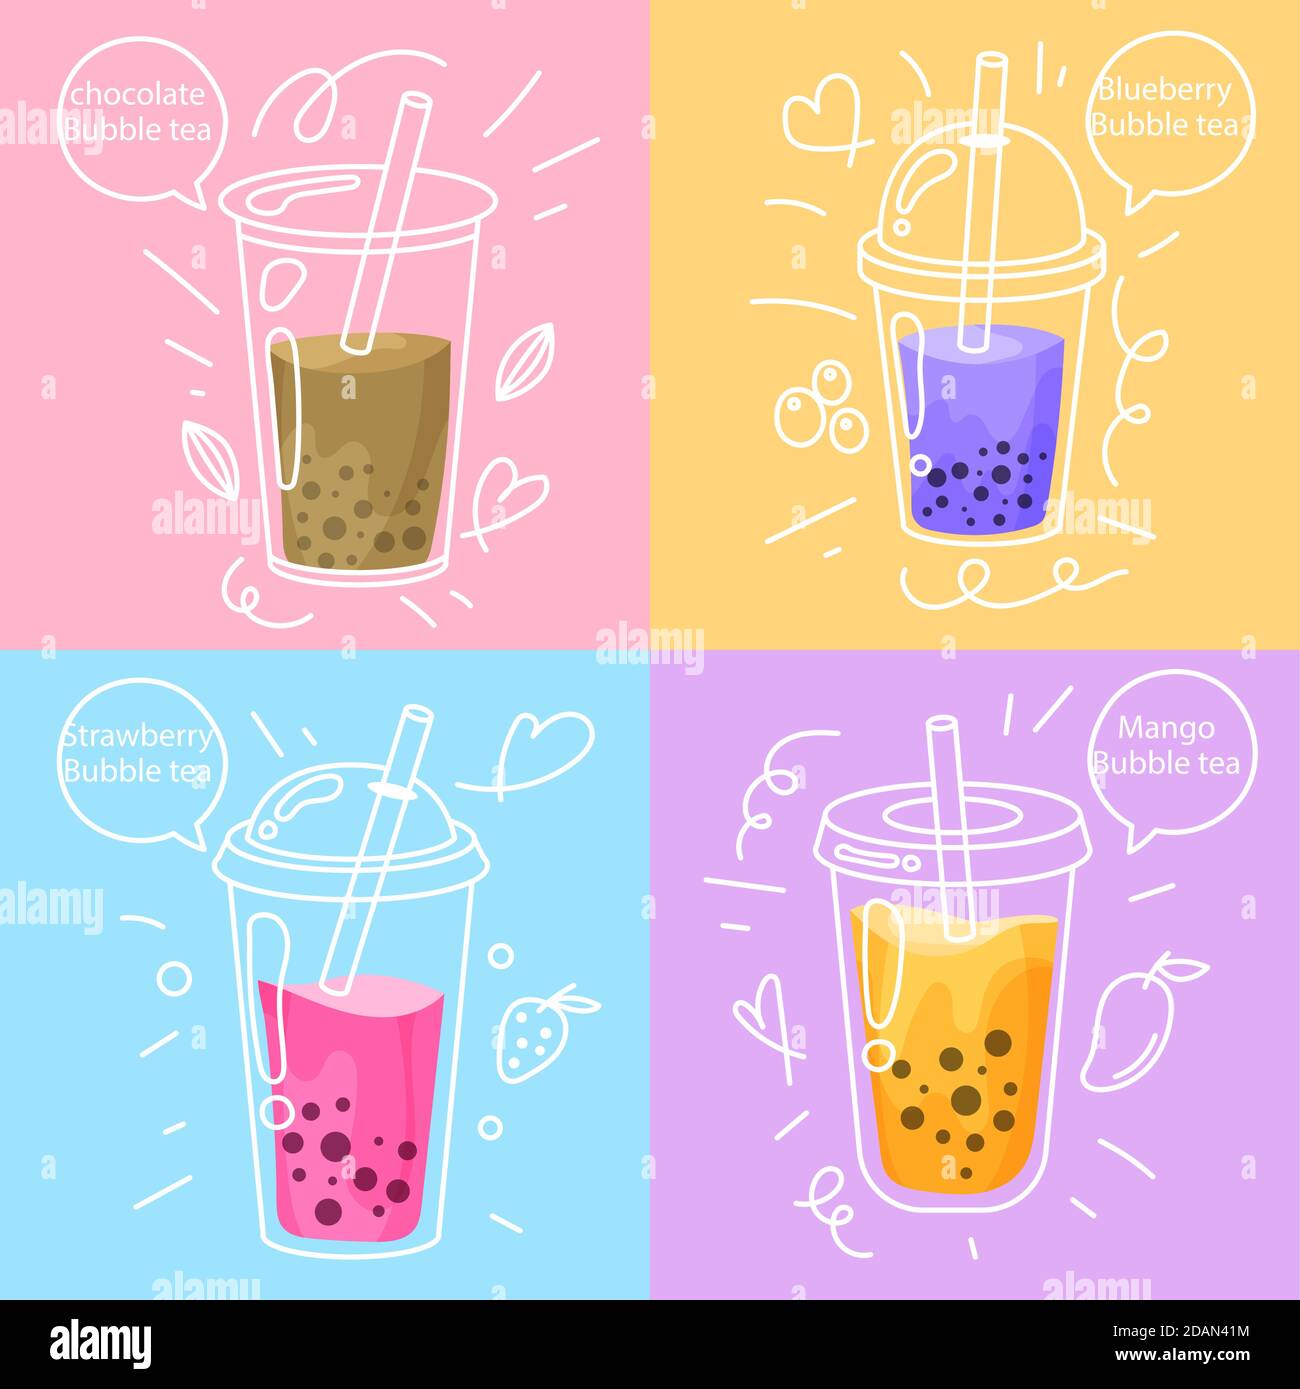 Taiwanese bubble tea Stock Vector Images - Alamy